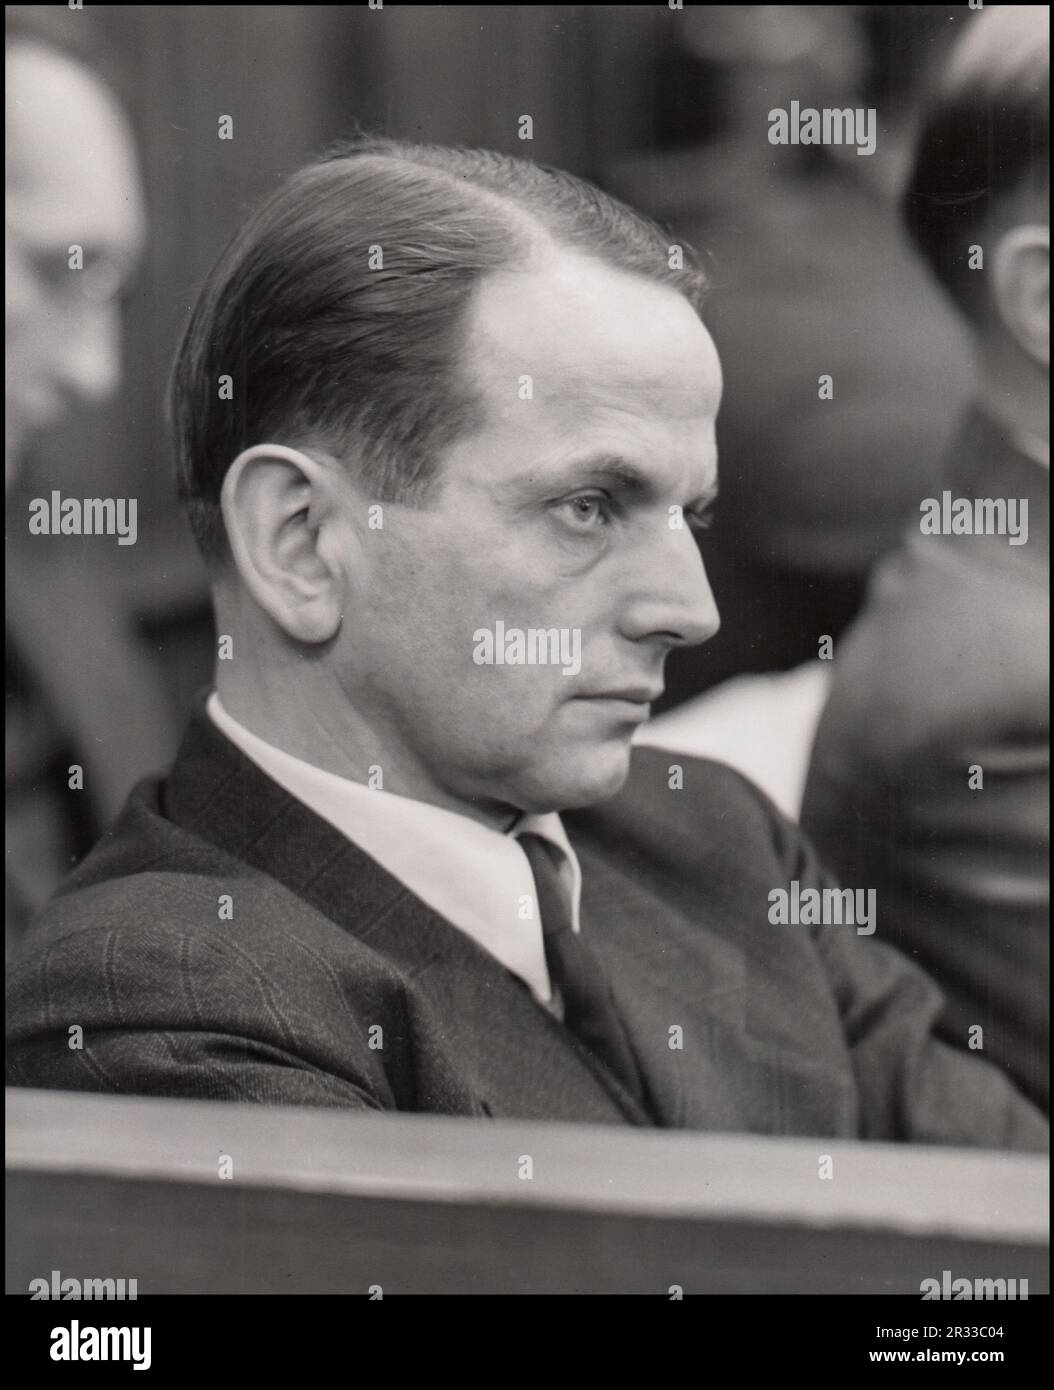 Defendant Otto Ohlendorf testifies on his own behalf at the Einsatzgruppen Trial. Otto Ohlendorf was a German SS functionary and Holocaust perpetrator during the Nazi era. An economist by education, he was head of the Sicherheitsdienst Inland, responsible for intelligence and security within Germany.  Born: 4 February 1907, Hoheneggelsen, Söhlde, Germany Died: 7 June 1951, Landsberg Prison, Landsberg am Lech, Germany Nationality: German Party: Nazi Party Education: Leipzig University Conviction(s): Crimes against humanity; War crimes; Membership in a criminal organization penalty: Death Stock Photo